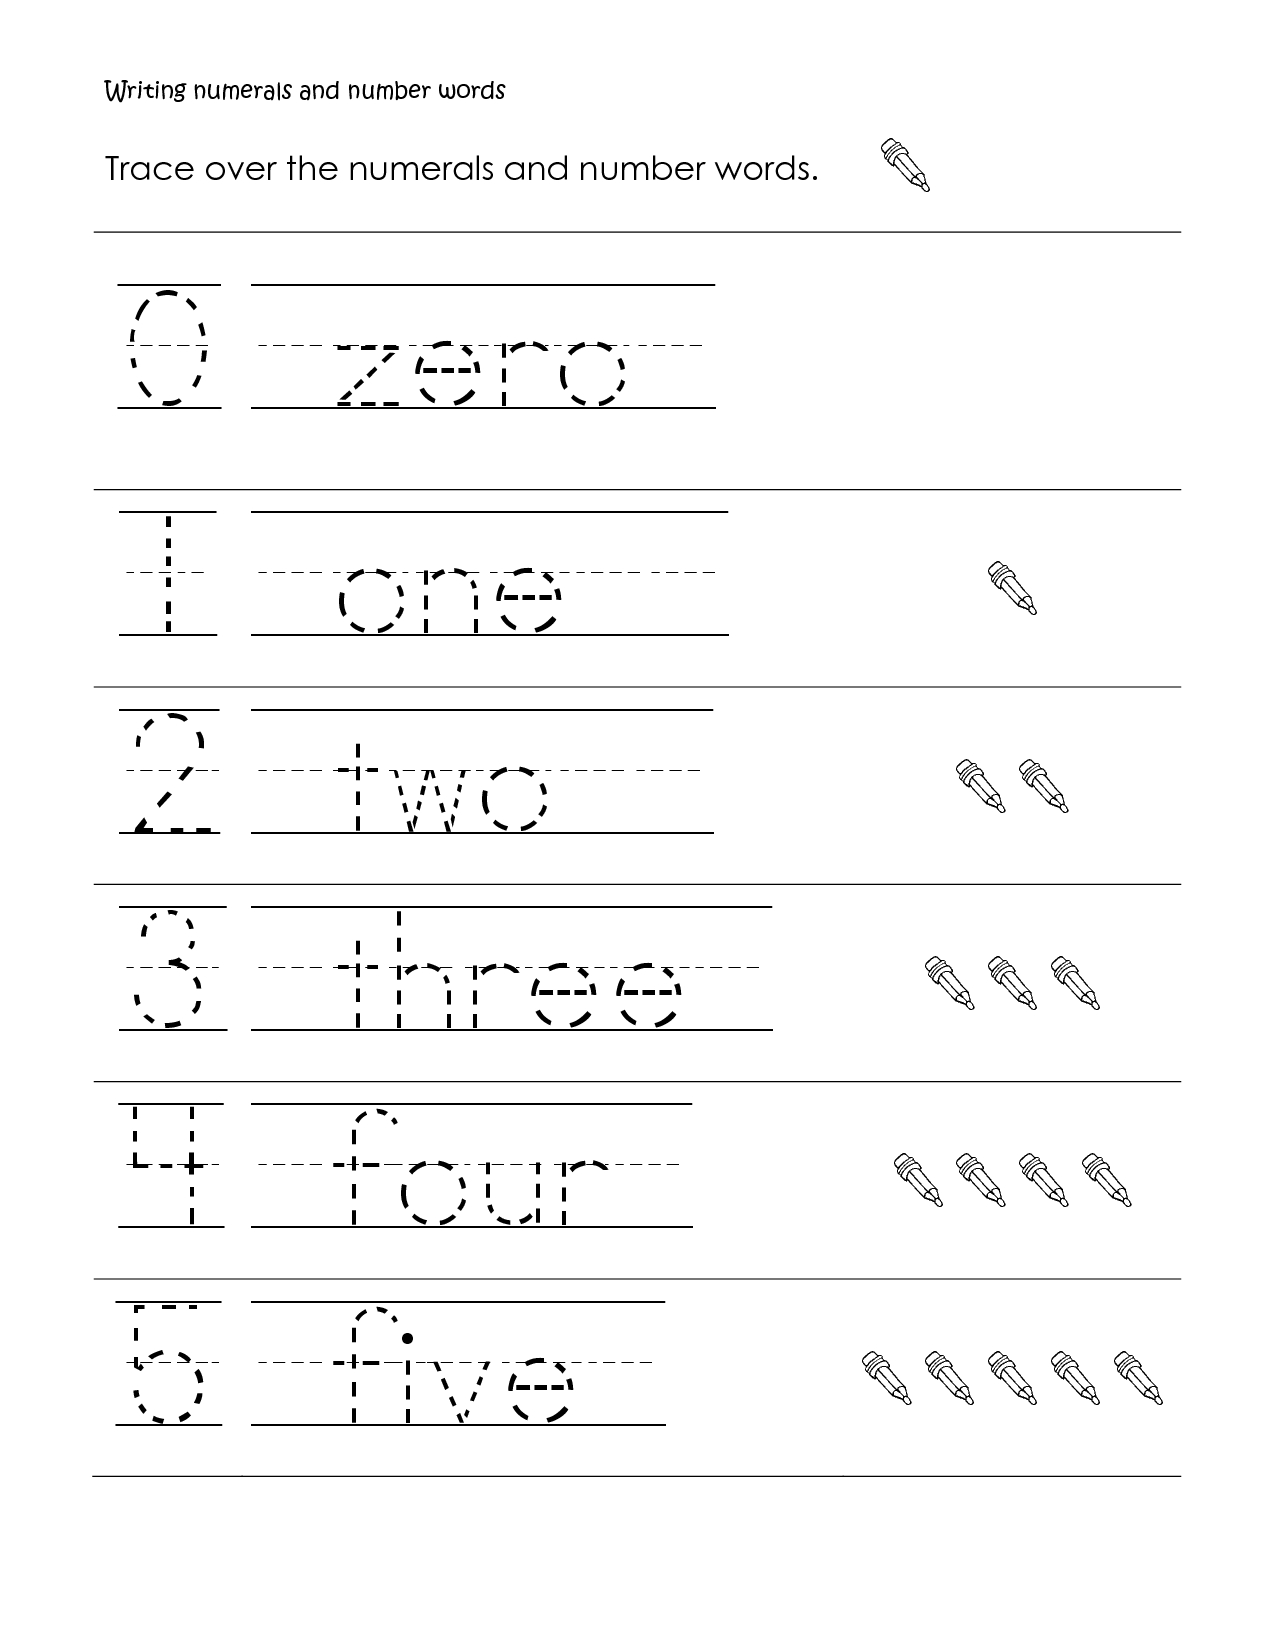 1St Grade Handwriting Practice Sheets Worksheets For All | Download - Free Printable Language Arts Worksheets For 1St Grade